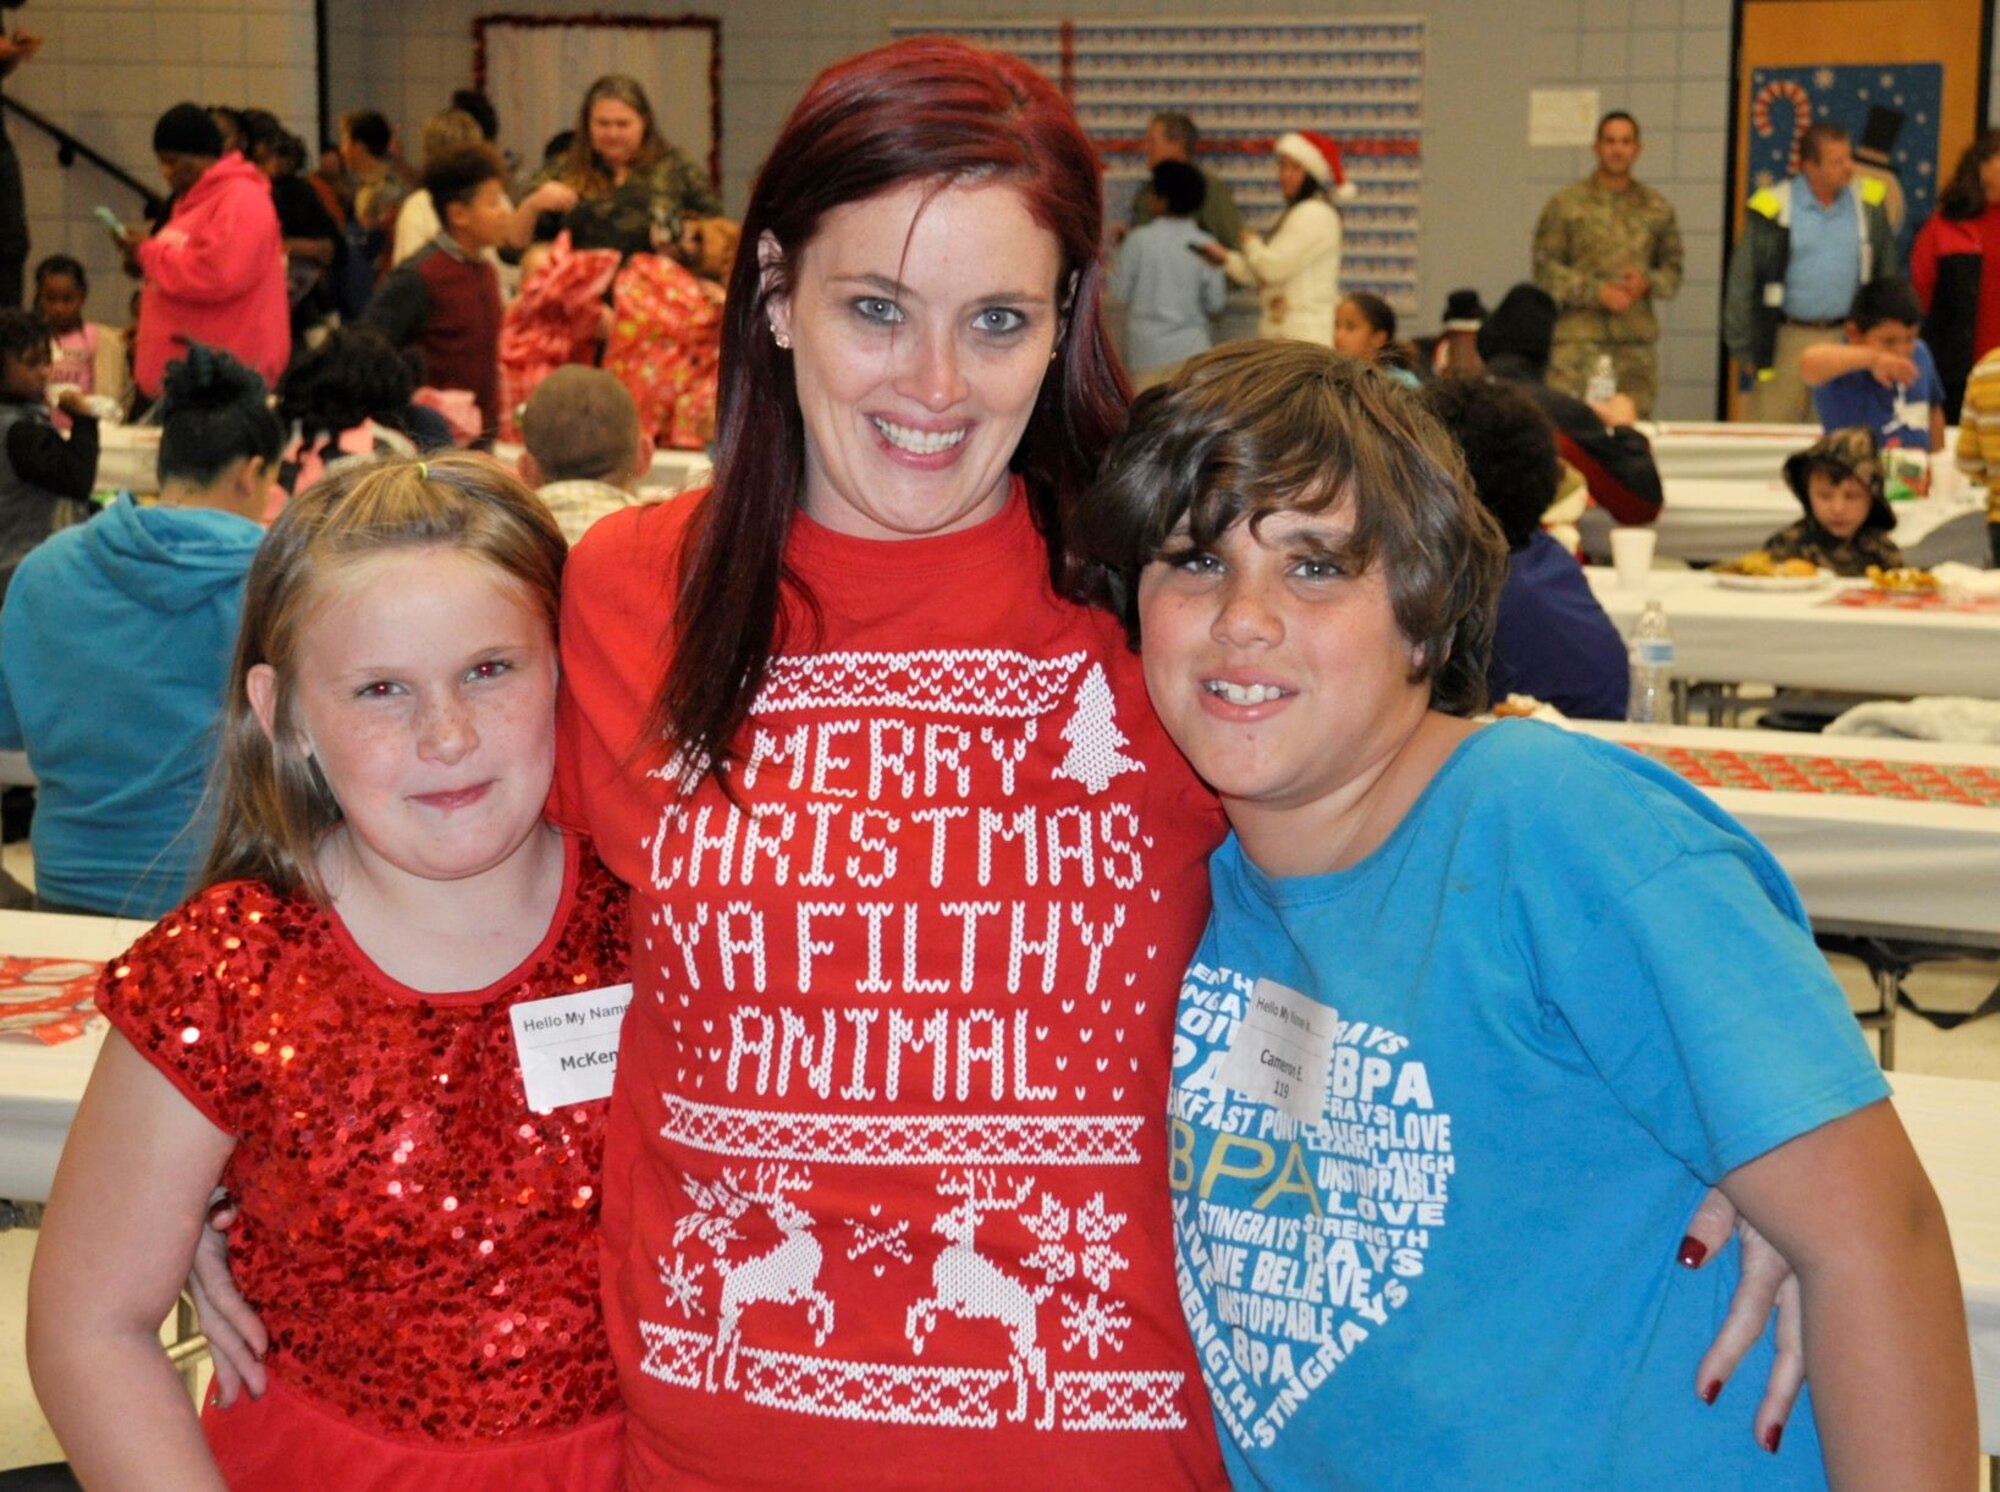 Tiffany Eldridge and her two children were all smiles Dec. 19 at the annual “Spread the Joy” event sponsored by the Air Force Civil Engineer Center Emergency Management team from Tyndall Air Force Base, Fla.